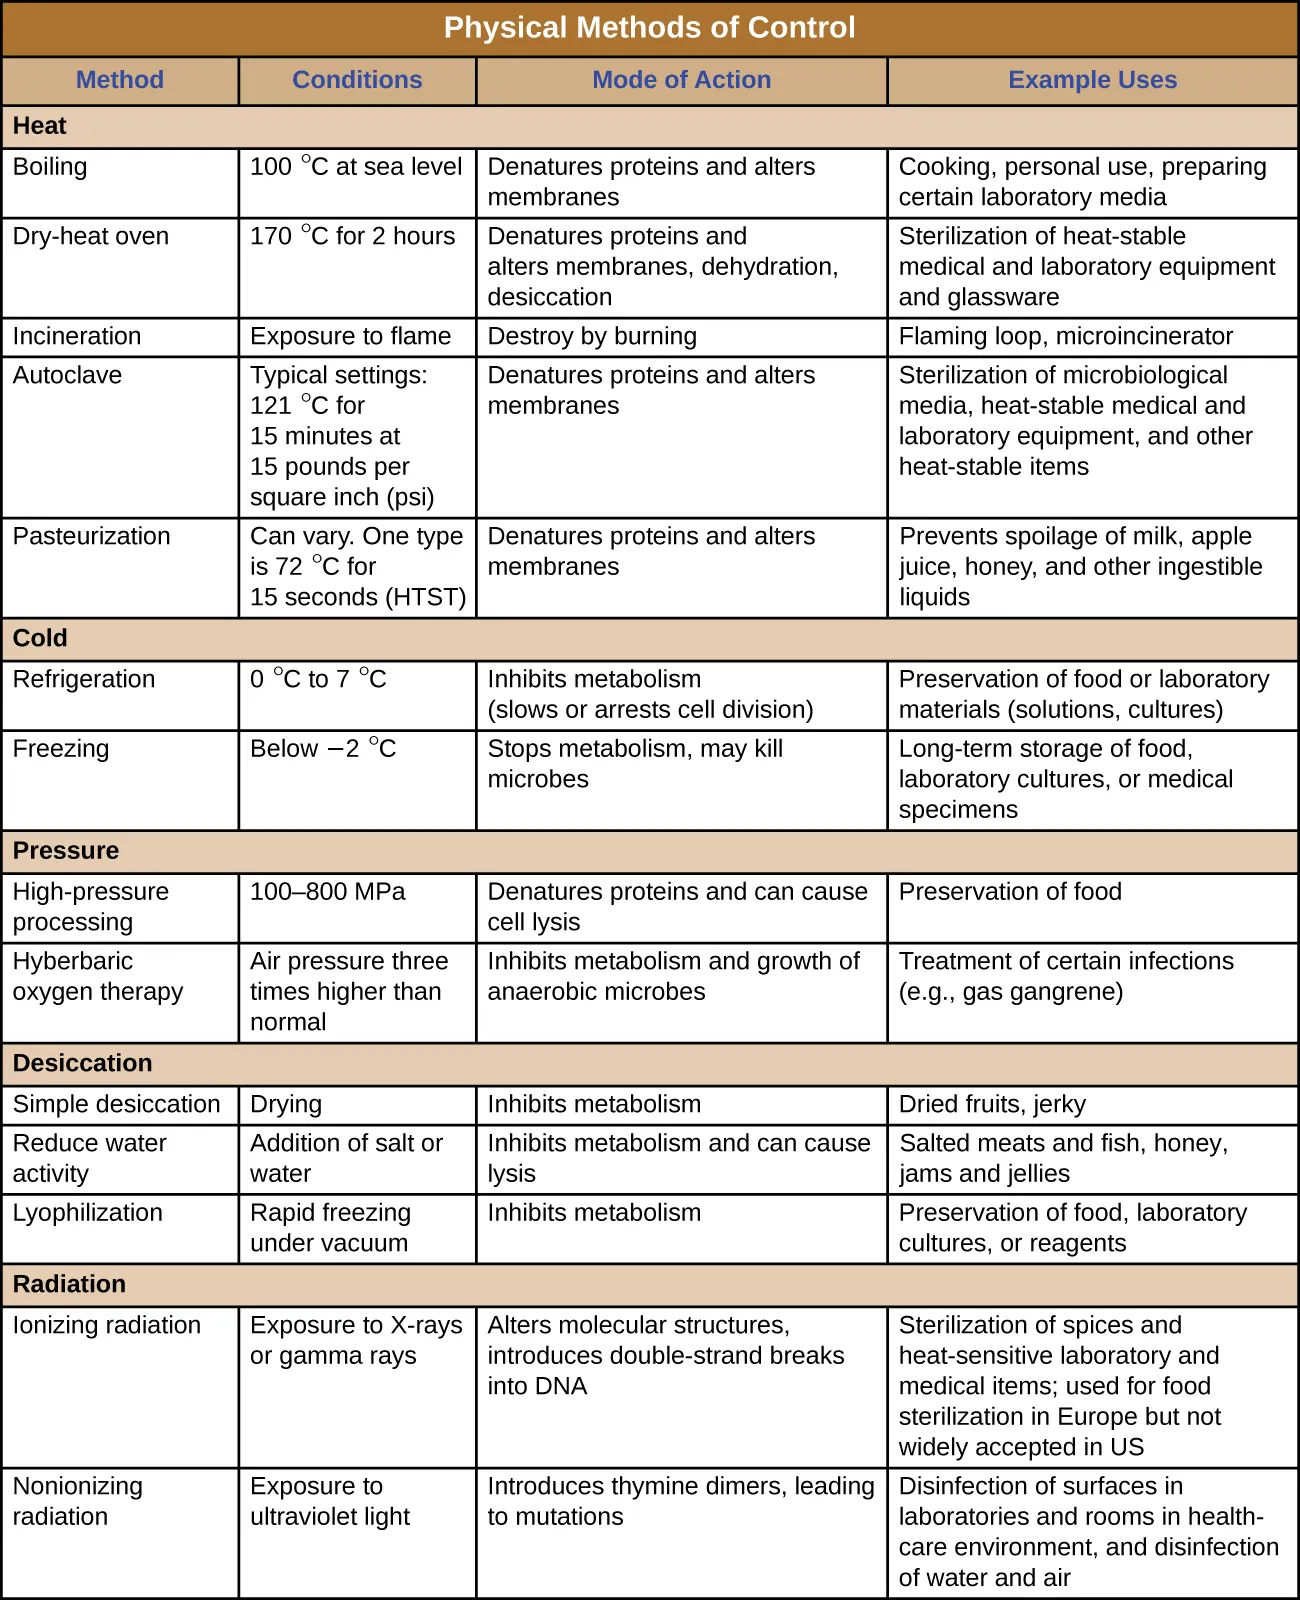 A table titled physical methods of control; 4 columns – method, conditions, mode of action, and examples of use. Groupings are: heat, cold, pressure, desiccation, radiation, sonication, and filtration. Heat. Boiling, 100 °C at sea level, Denatures proteins and alters membranes; usese Cooking, personal use, preparing certain laboratory media. Dry-heat oven, 170 °C for 2 hours, Denatures proteins and alters membranes, dehydration, desiccation; uses Sterilization of heat-stable medical and laboratory equipment and glassware. Incineration, Exposure to flame,Destroy by burning, Flaming loop, microincinerator. Autoclave, Typical settings: 121 °C for 15–40 minutes at 15 psi, Denatures proteins and alters membranes, Sterilization of microbiological media, heat-stable medical and laboratory equipment, and other heat-stable items. Pasteurization, 72 °C for 15 seconds (HTST) or 138 °C for ≥ 2 seconds (UHT), Denatures proteins and alters membranes, Prevents spoilage of milk, apple juice, honey, and other ingestible liquids. Cold. Refrigeration, 0 °C to 7 °C, Inhibits metabolism (slows or arrests cell division), Preservation of food or laboratory materials (solutions, cultures). Freezing, Below −2 °C, Stops metabolism, may kill microbes, Long-term storage of food, laboratory cultures, or medical specimens. Pressure. High-pressure processing, Exposure to pressures of 100–800 MPa, Denatures proteins and can cause cell lysis Preservation of food, Hyberbaric oxygen therapy. Inhalation of pure oxygen at a pressure of 1–3 atm, Inhibits metabolism and growth of anaerobic microbes, Treatment of certain infections (e.g., gas gangrene). Dessication. Simple desiccation, Drying, Inhibits metabolism, Dried fruits, jerky. Reduce water activity, Addition of salt or water Inhibits metabolism and can cause lysis, Salted meats and fish, honey, jams and jellies. Lyophilization, Rapid freezing under vacuum, Inhibits metabolism Preservation of food, laboratory cultures, or reagents. Radiation. Ionizing radiation, Exposure to X-rays or gamma rays, Alters molecular structures, introduces double-strand breaks into DNA, Sterilization of spices and heat-sensitive laboratory and medical items; used for food sterilization in Europe but not widely accepted in US. Nonionizing radiation, Exposure to ultraviolet light, Introduces thymine dimers, leading to mutations, Surface sterilization of laboratory materials, water purification. Sonication, Exposure to ultrasonic waves, Cavitation (formation of empty space) disrupts cells, lysing them, Laboratory research to lyse cells; cleaning jewelry, lenses, and equipment. Filtration. HEPA filtration, Use of HEPA filter with 0.3-µm pore size Physically removes microbes from air, Laboratory biological safety cabinets, operating rooms, isolation units, heating and air conditioning systems, vacuum cleaners. Membrane filtration Use of membrane filter with 0.2-µm or smaller pore size, Physically removes microbes from liquid solutions, Removal of bacteria from heat-sensitive solutions like vitamins, antibiotics, and media with heat-sensitive components. 